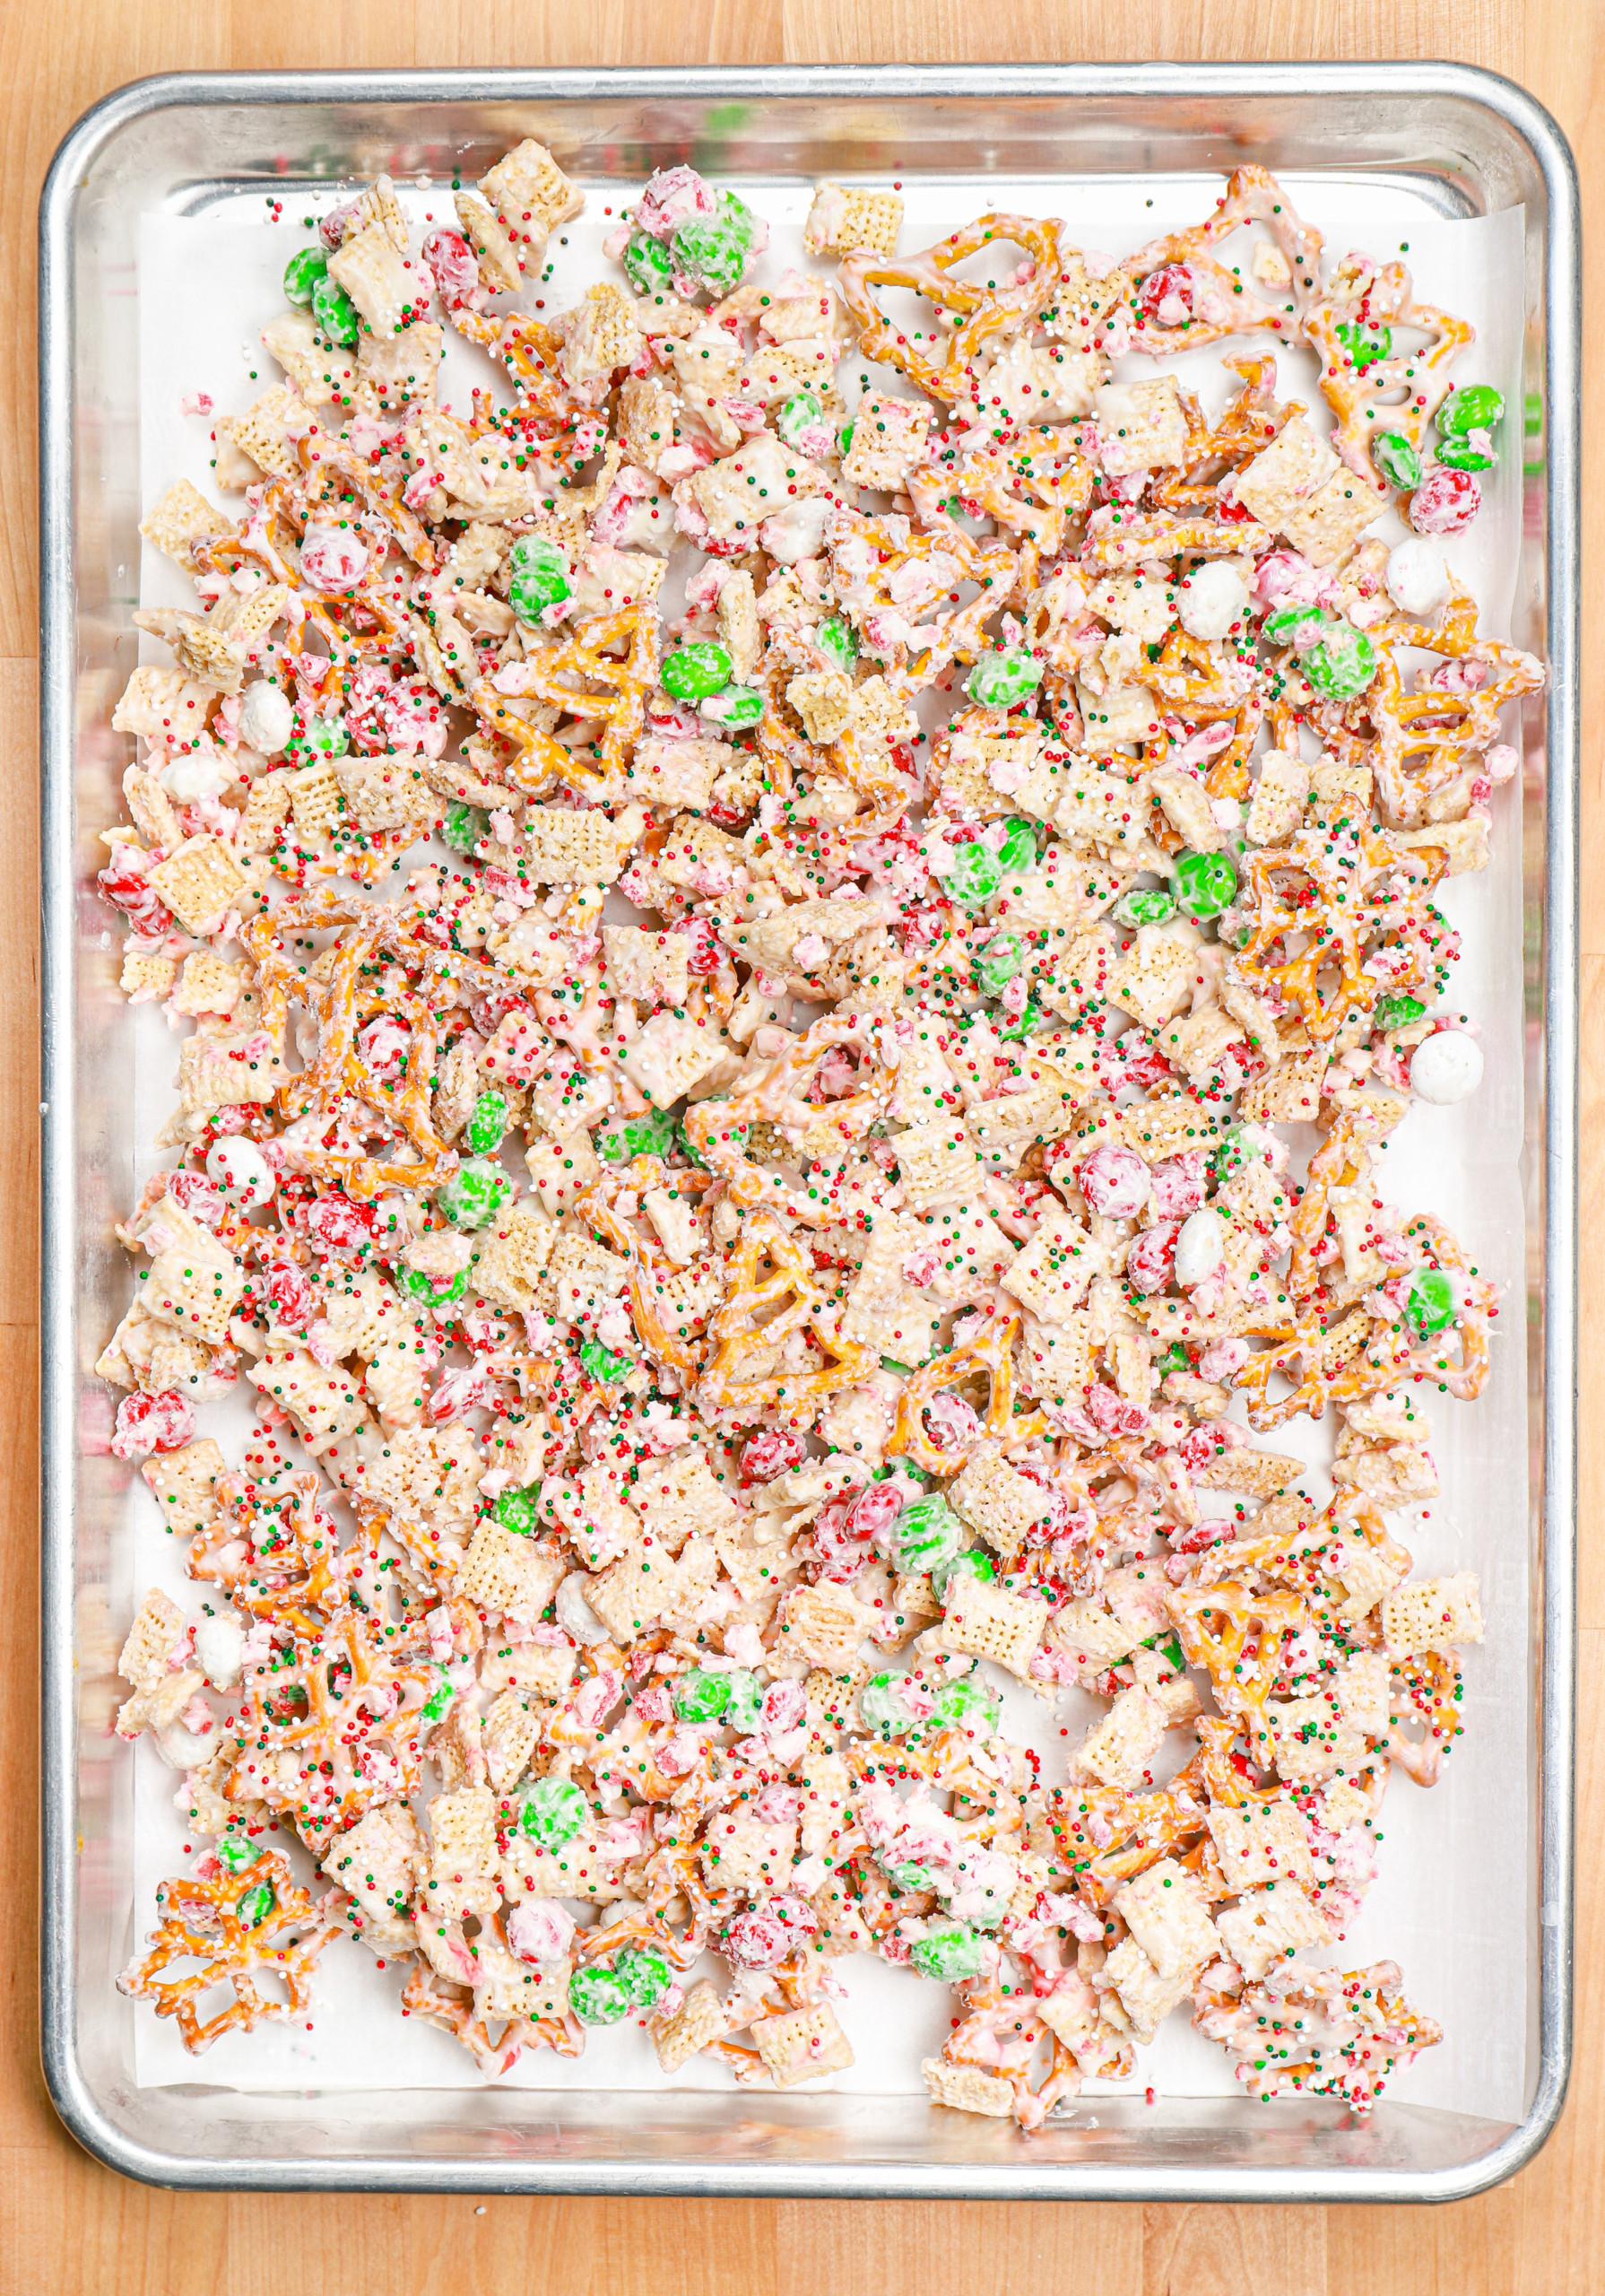 Peppermint crunch snack mix spread out on a parchment paper lined baking sheet.